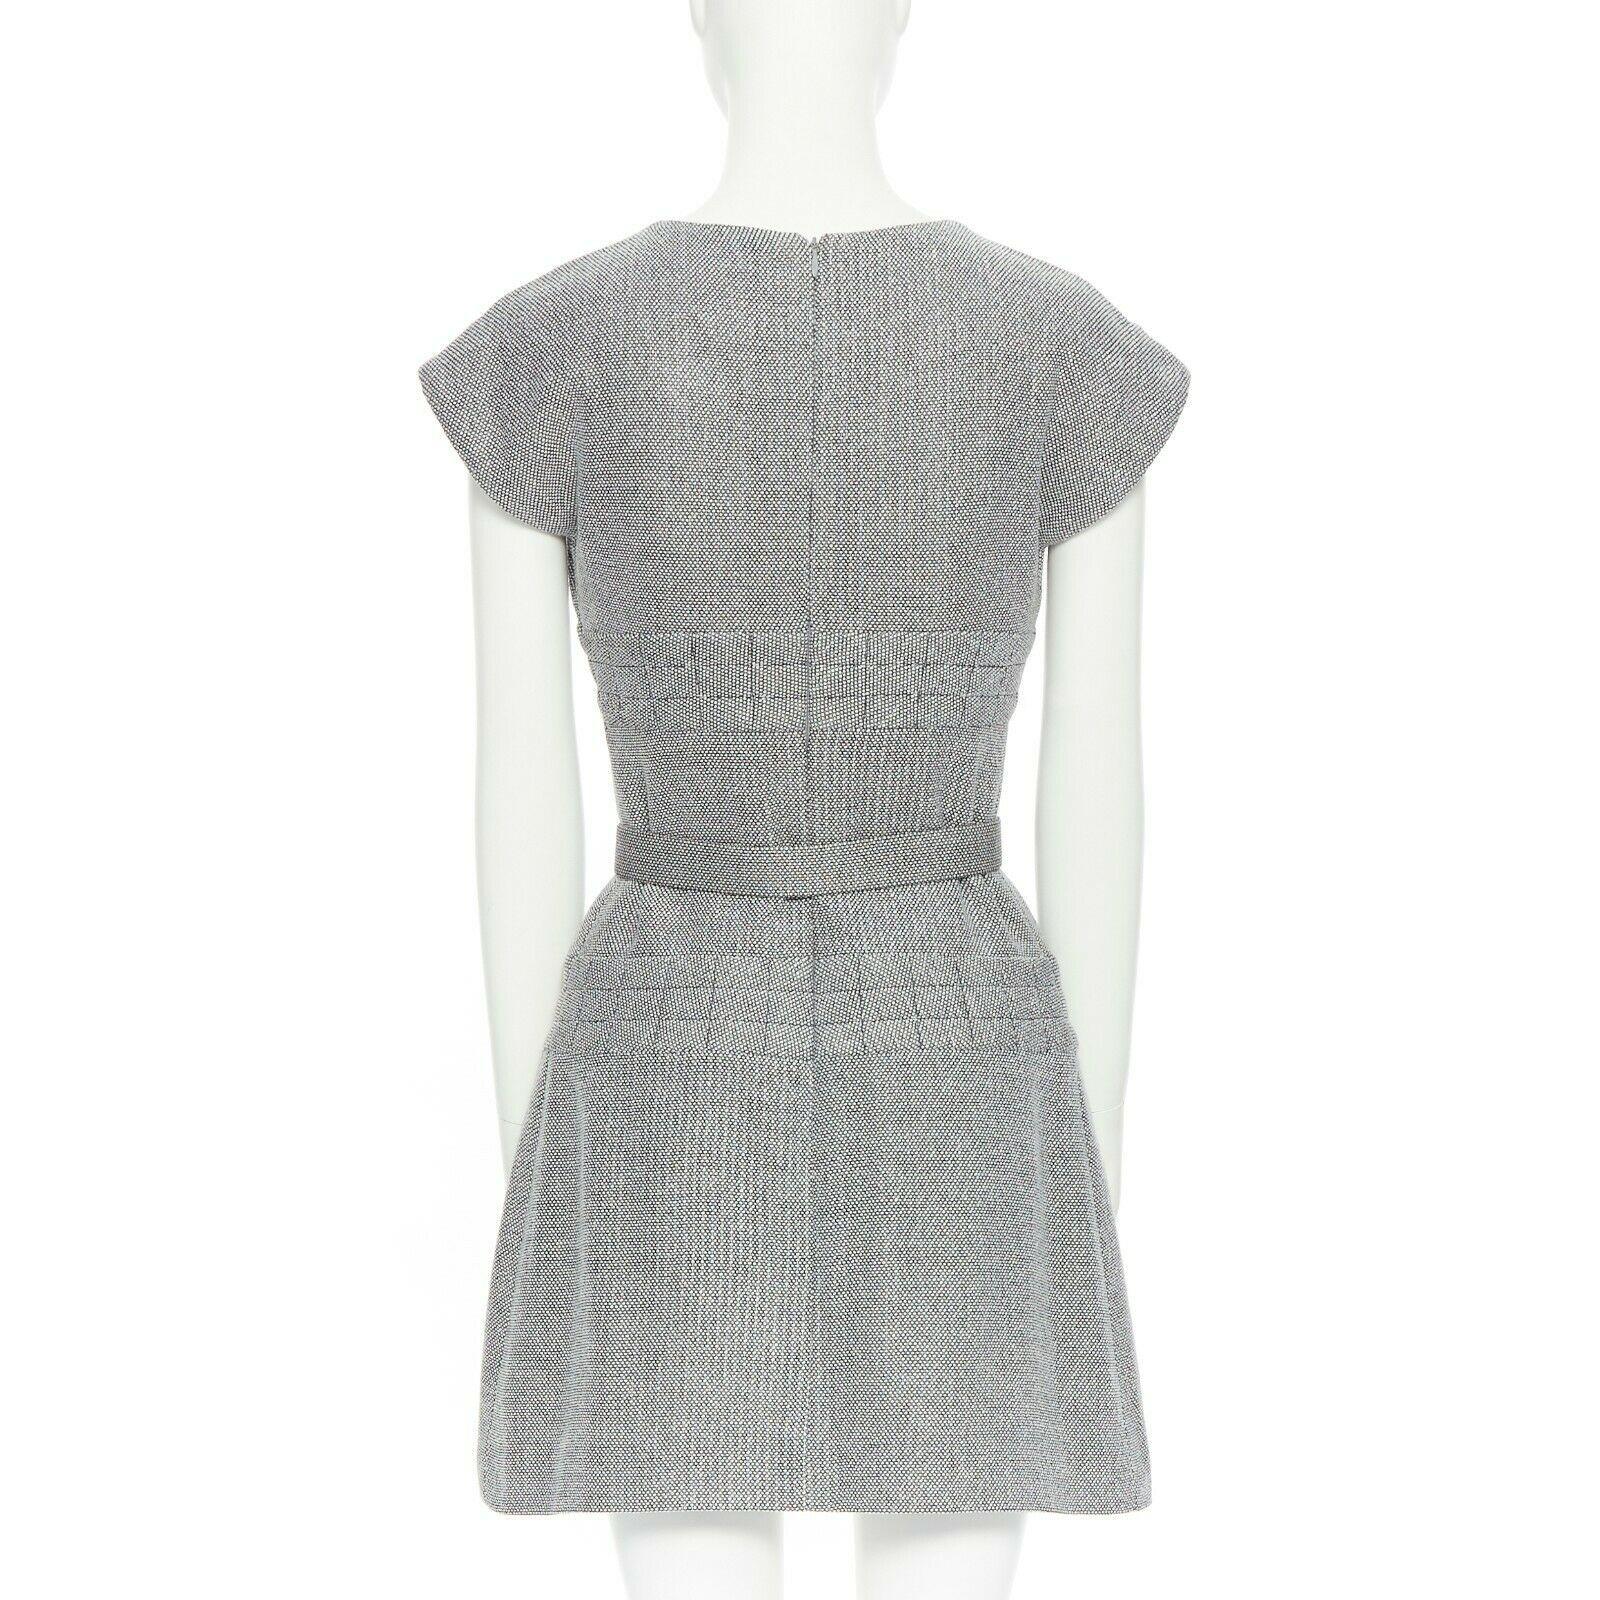 Women's CHANEL grey white black quilted tweed cap sleeves belted bell dress FR34 XS